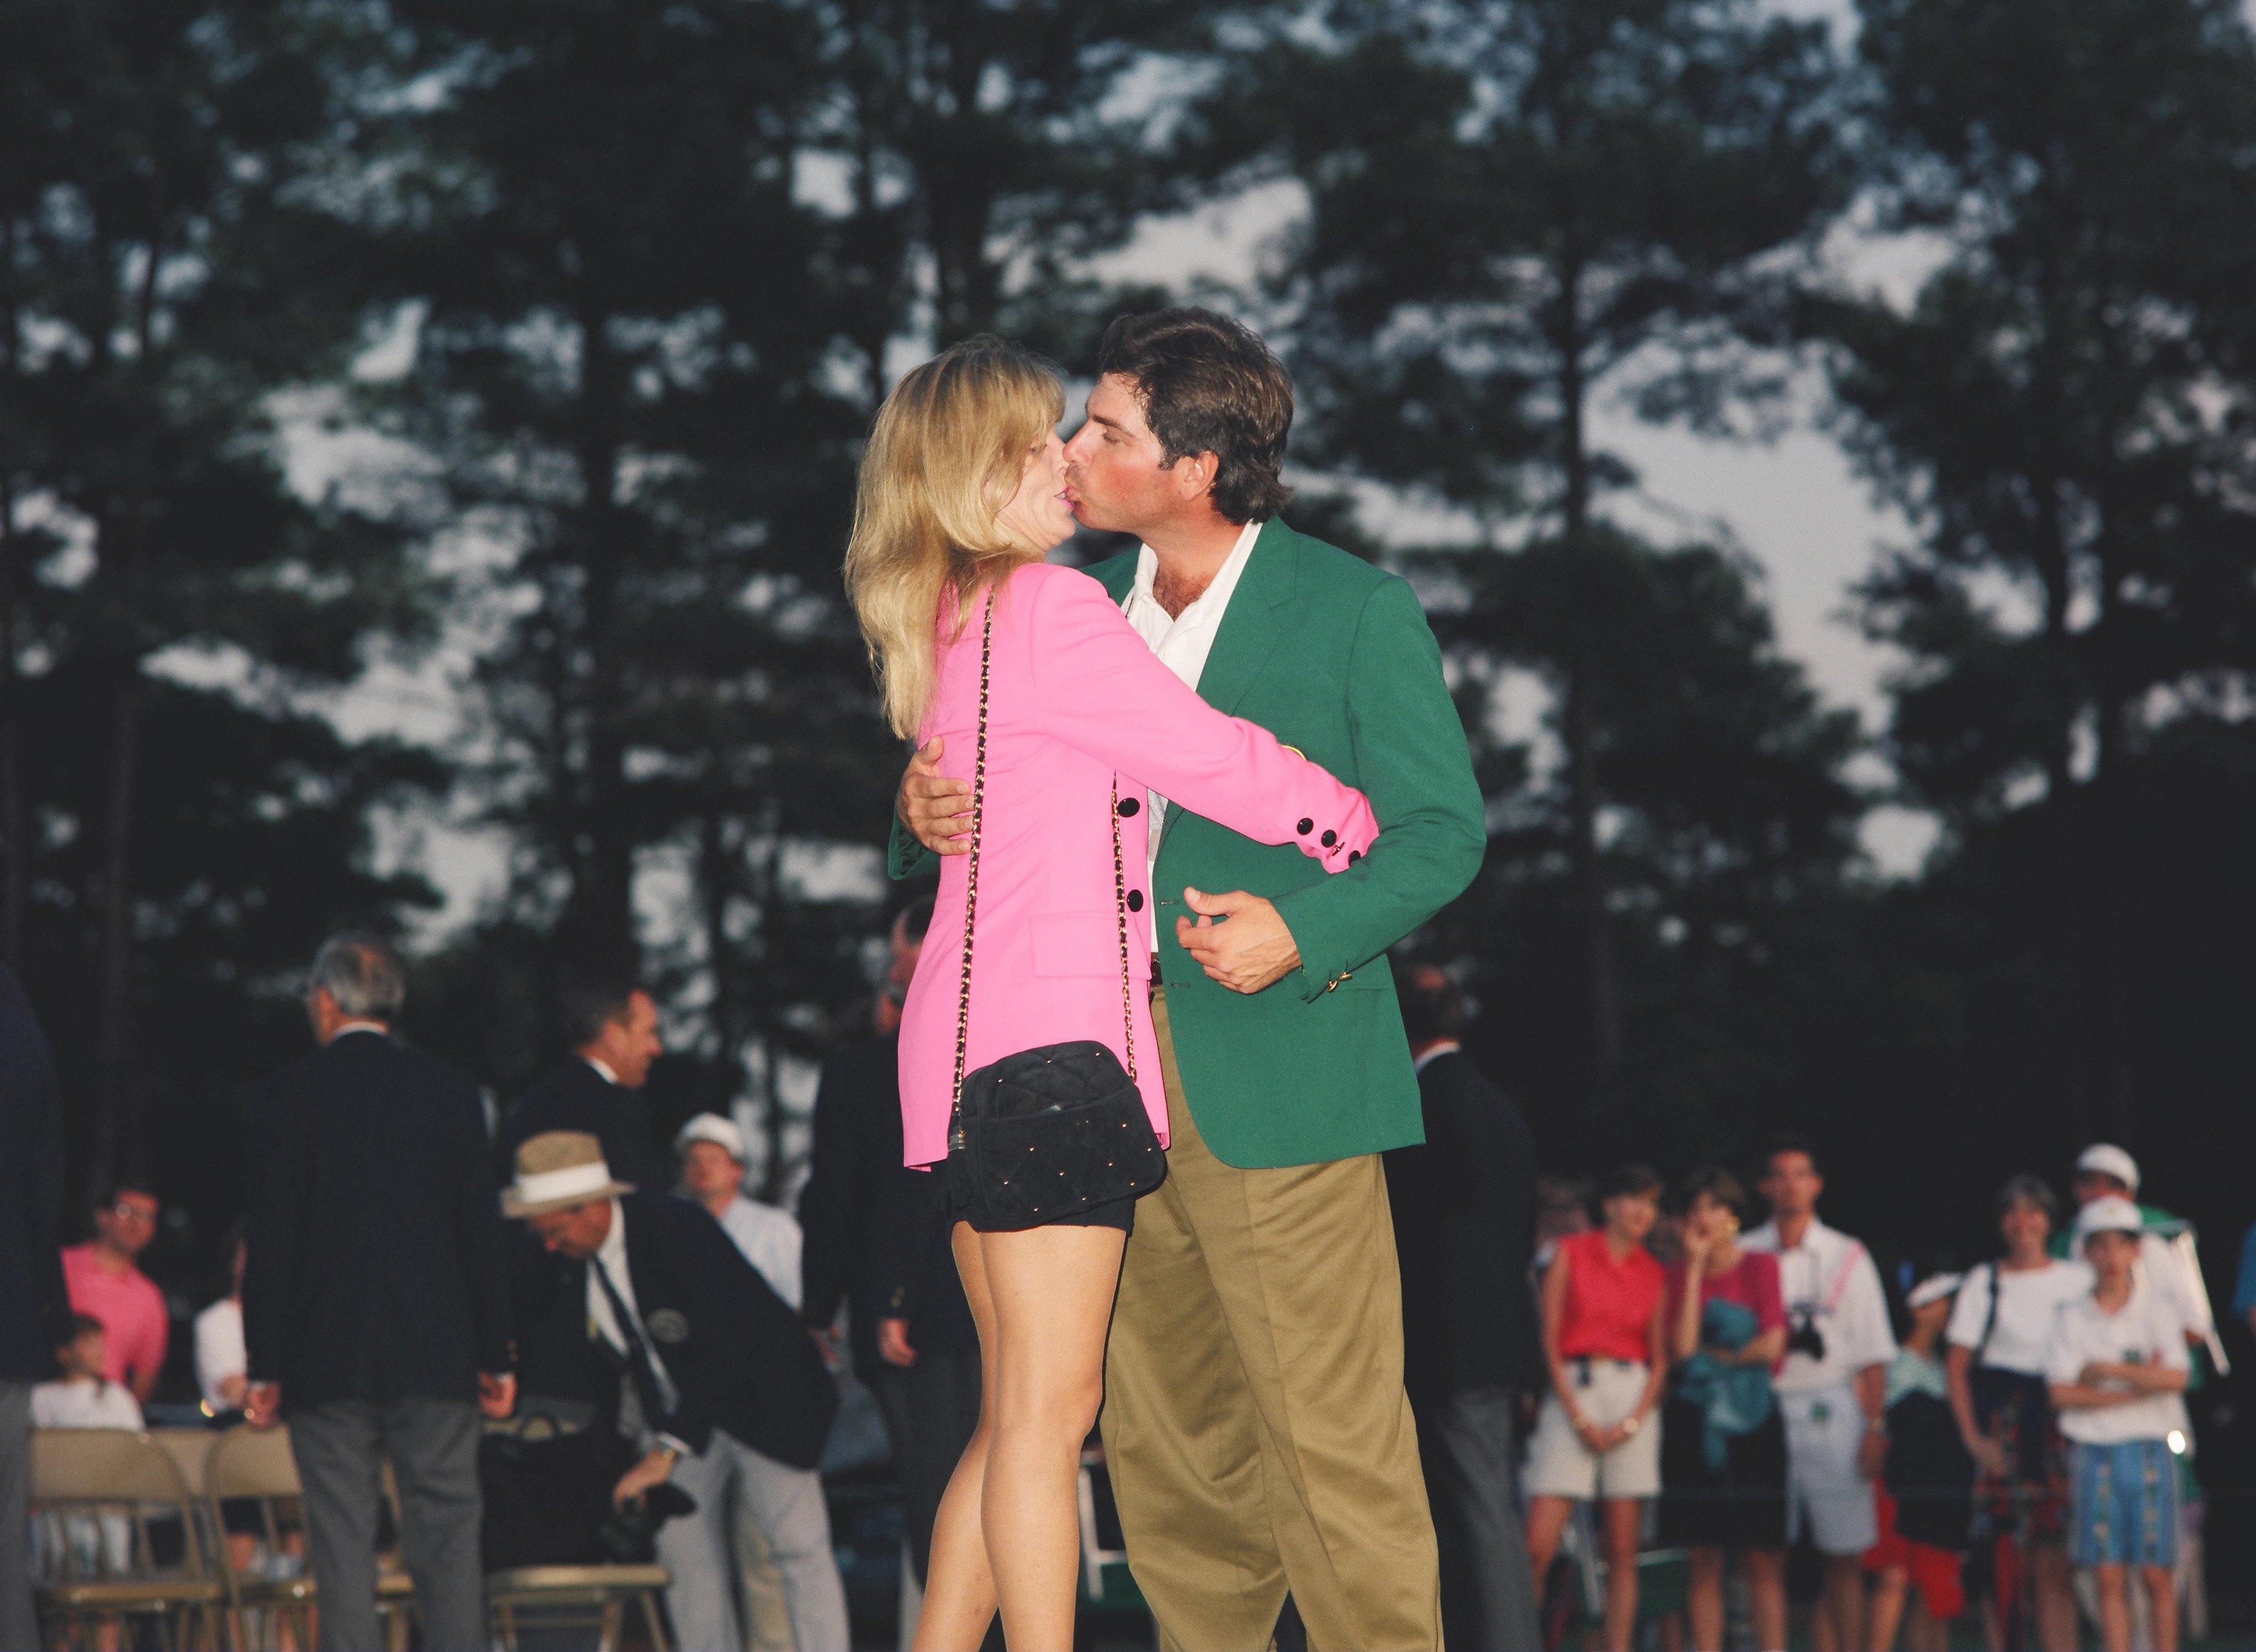 Fred Couples 7 Million Divorce Was Just the Start of His 1st Ex-Wifes Troubles